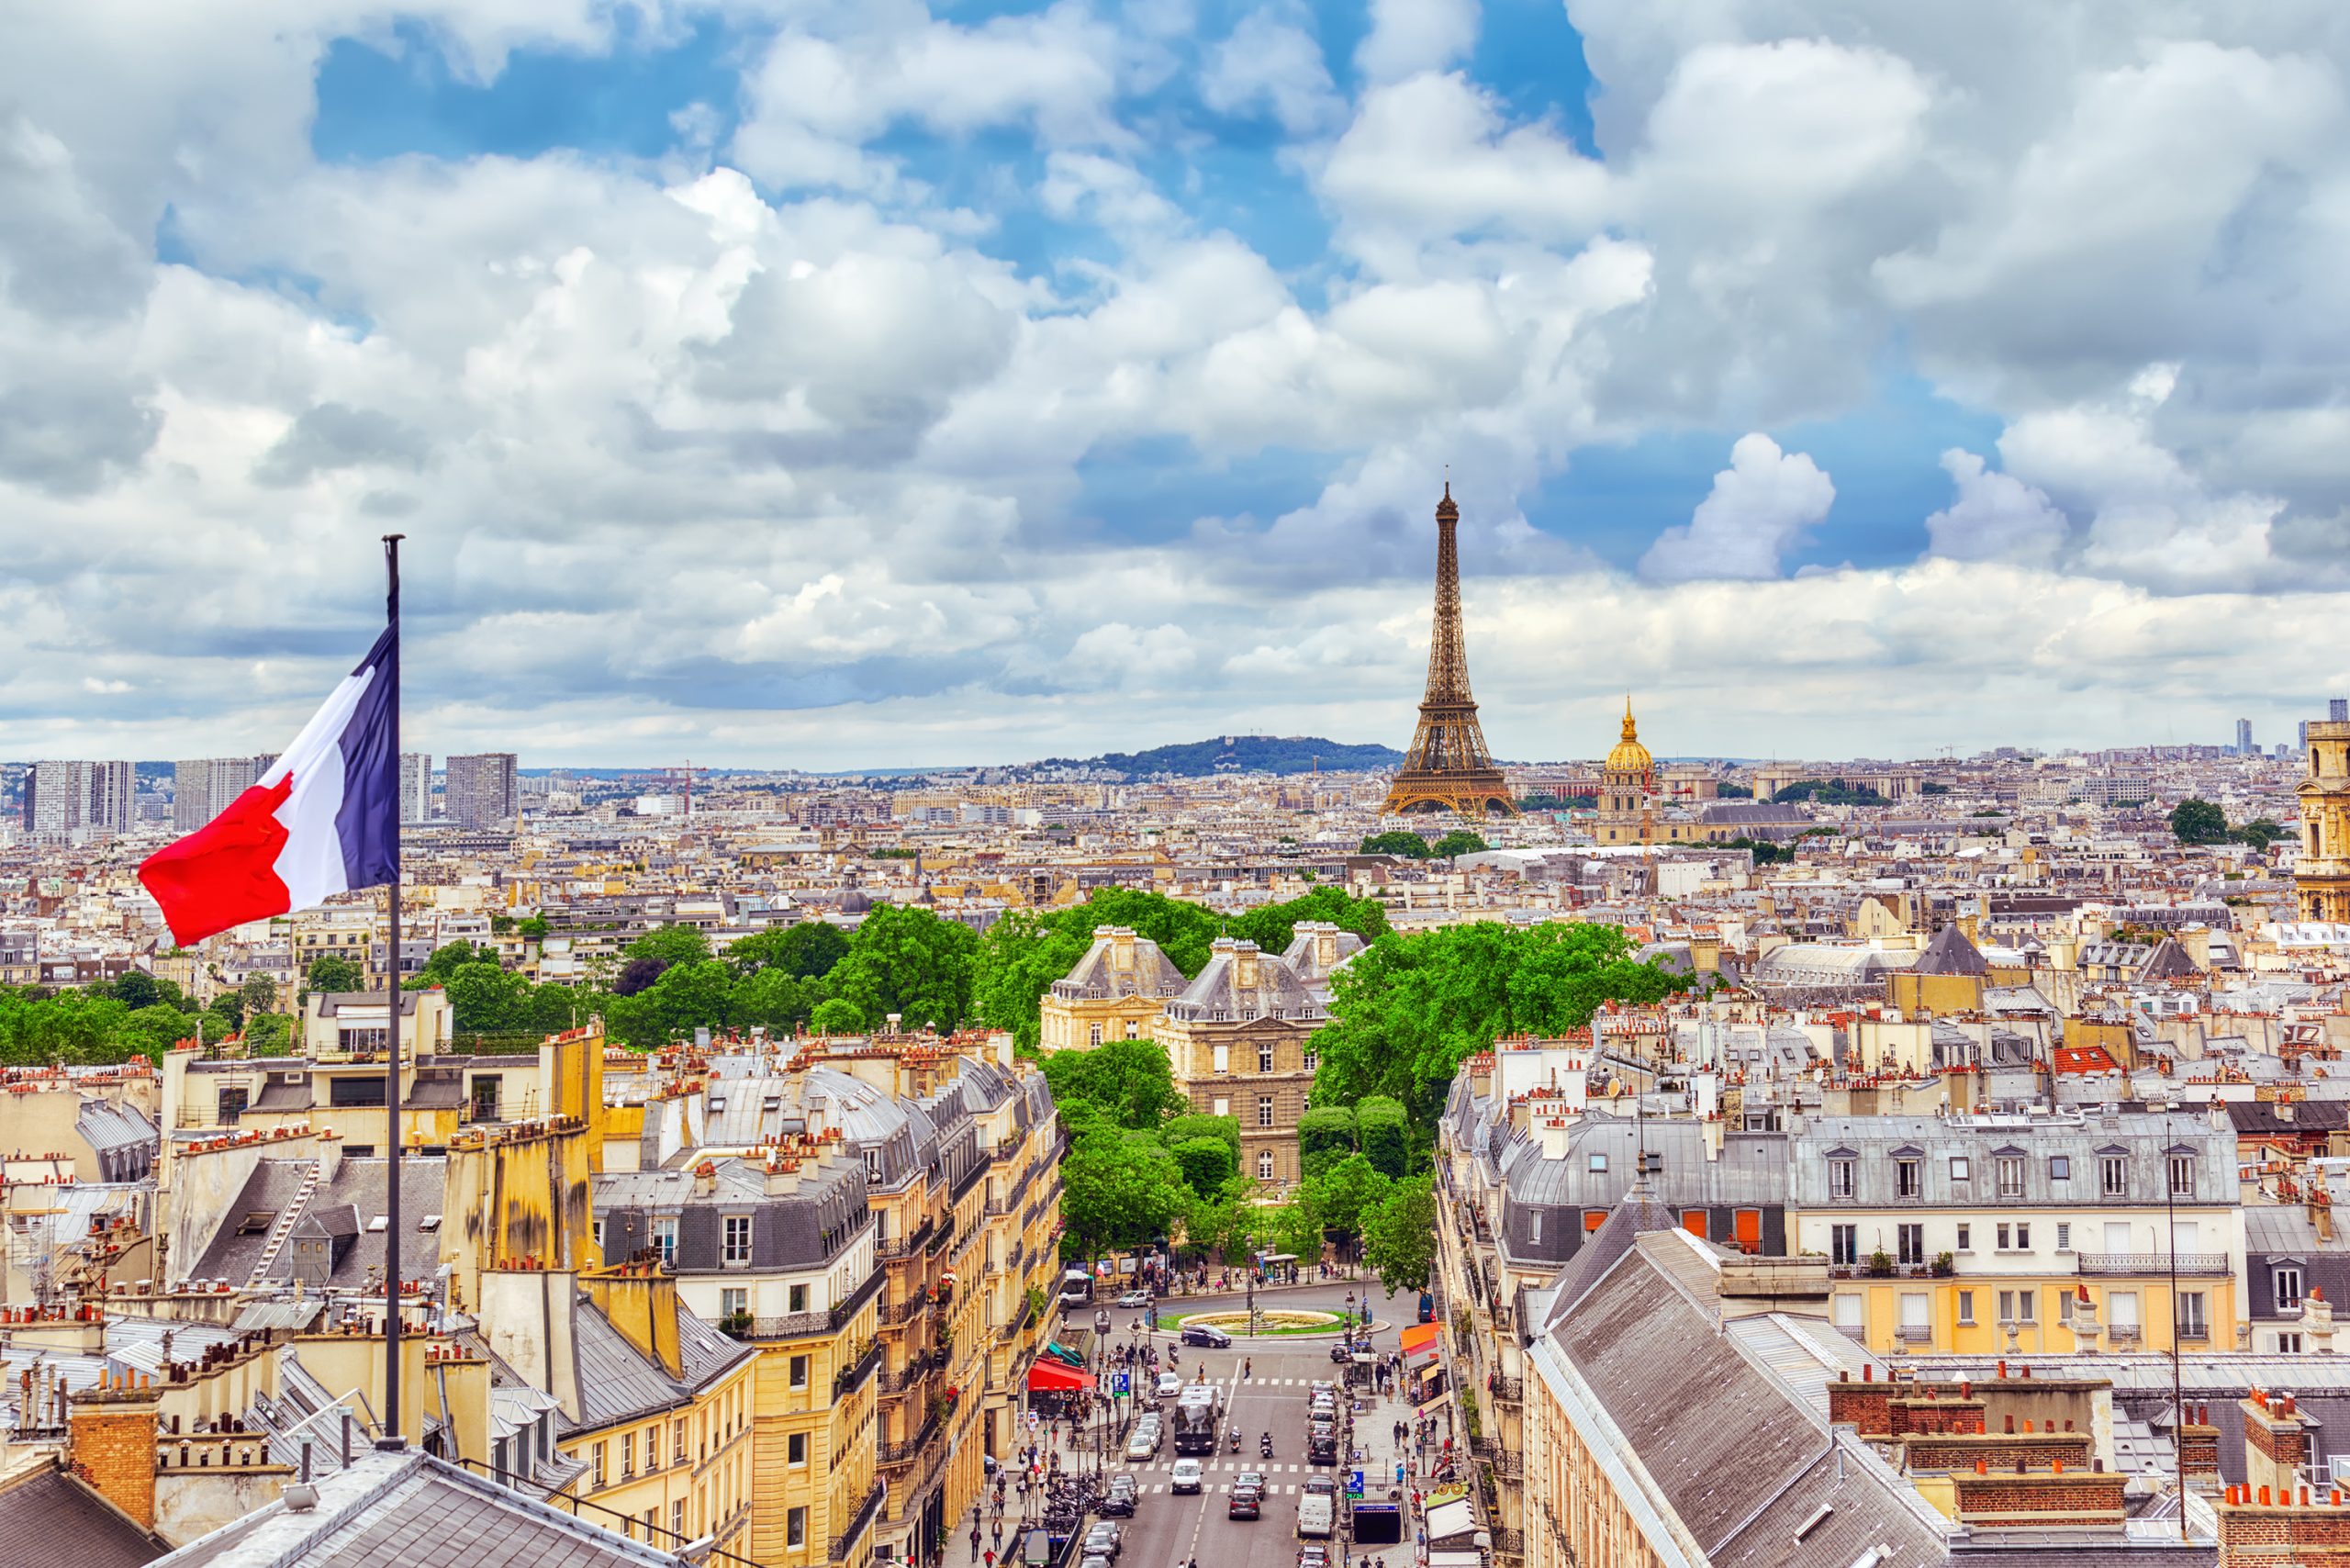 Best views in Paris from the Pantheon featuring the Eiffel Tower and flying French flag.